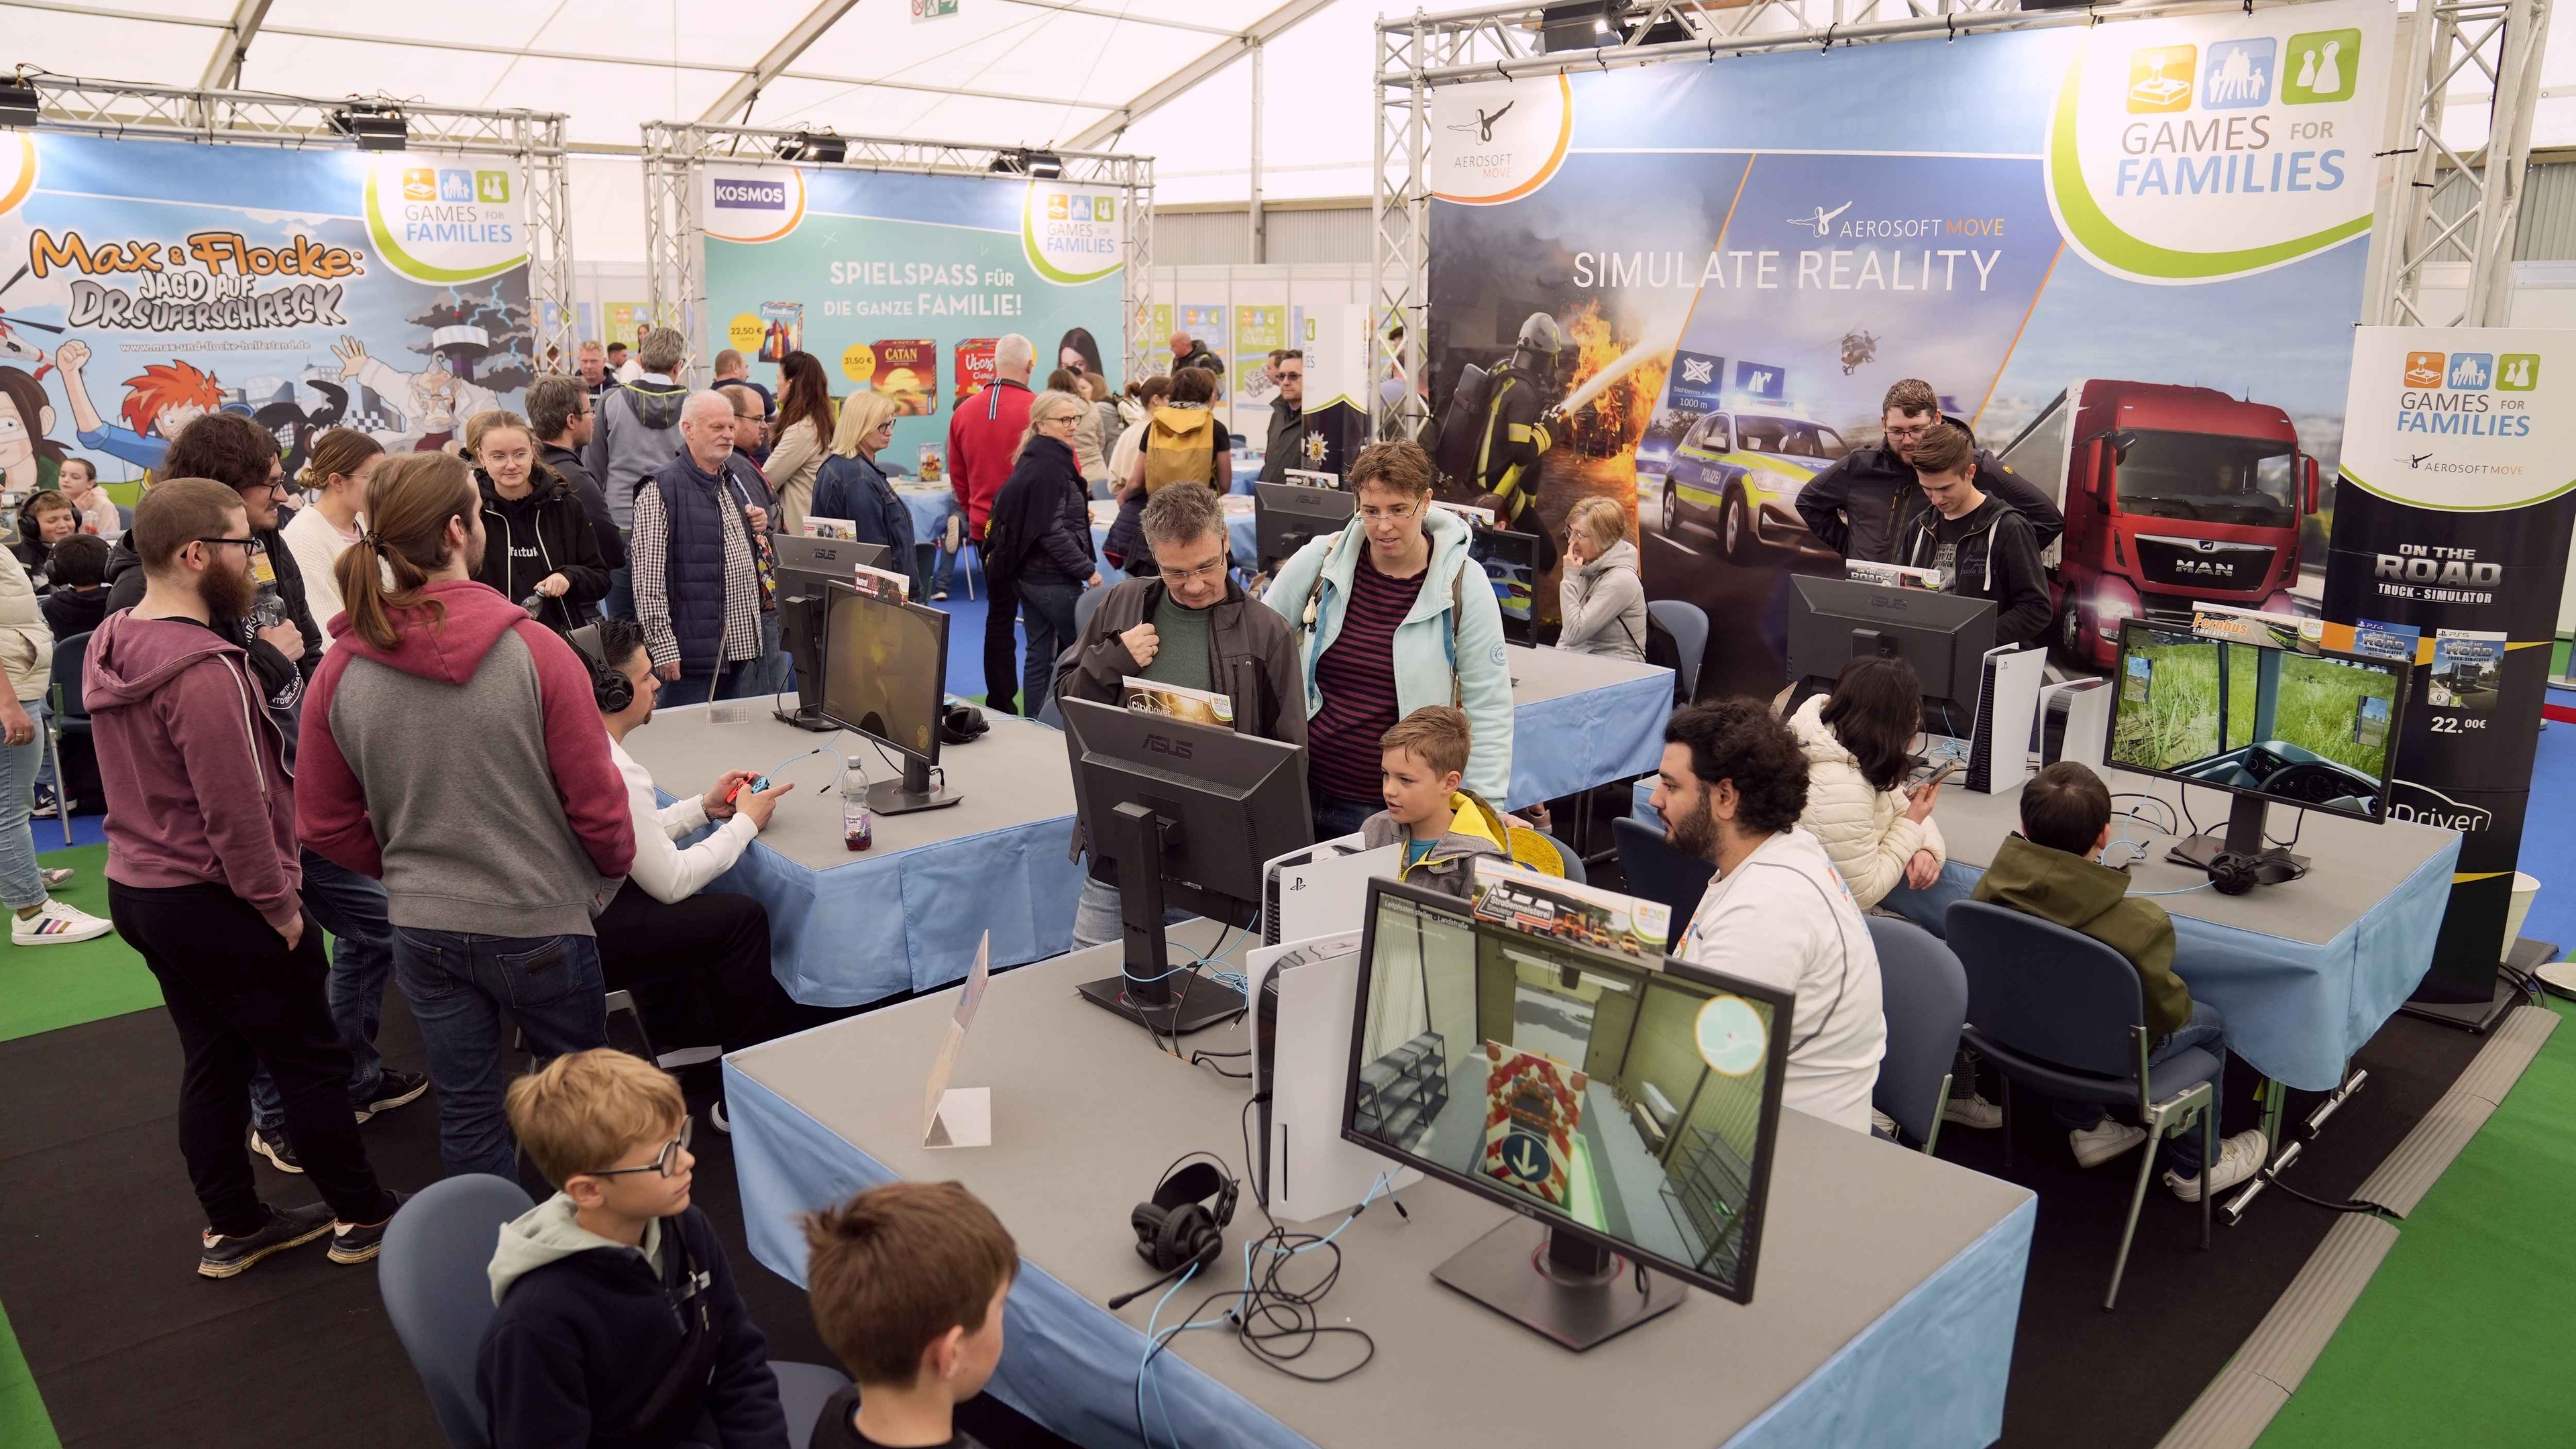 Games for Families Attracts a Large Number of Visitors in Mannheim